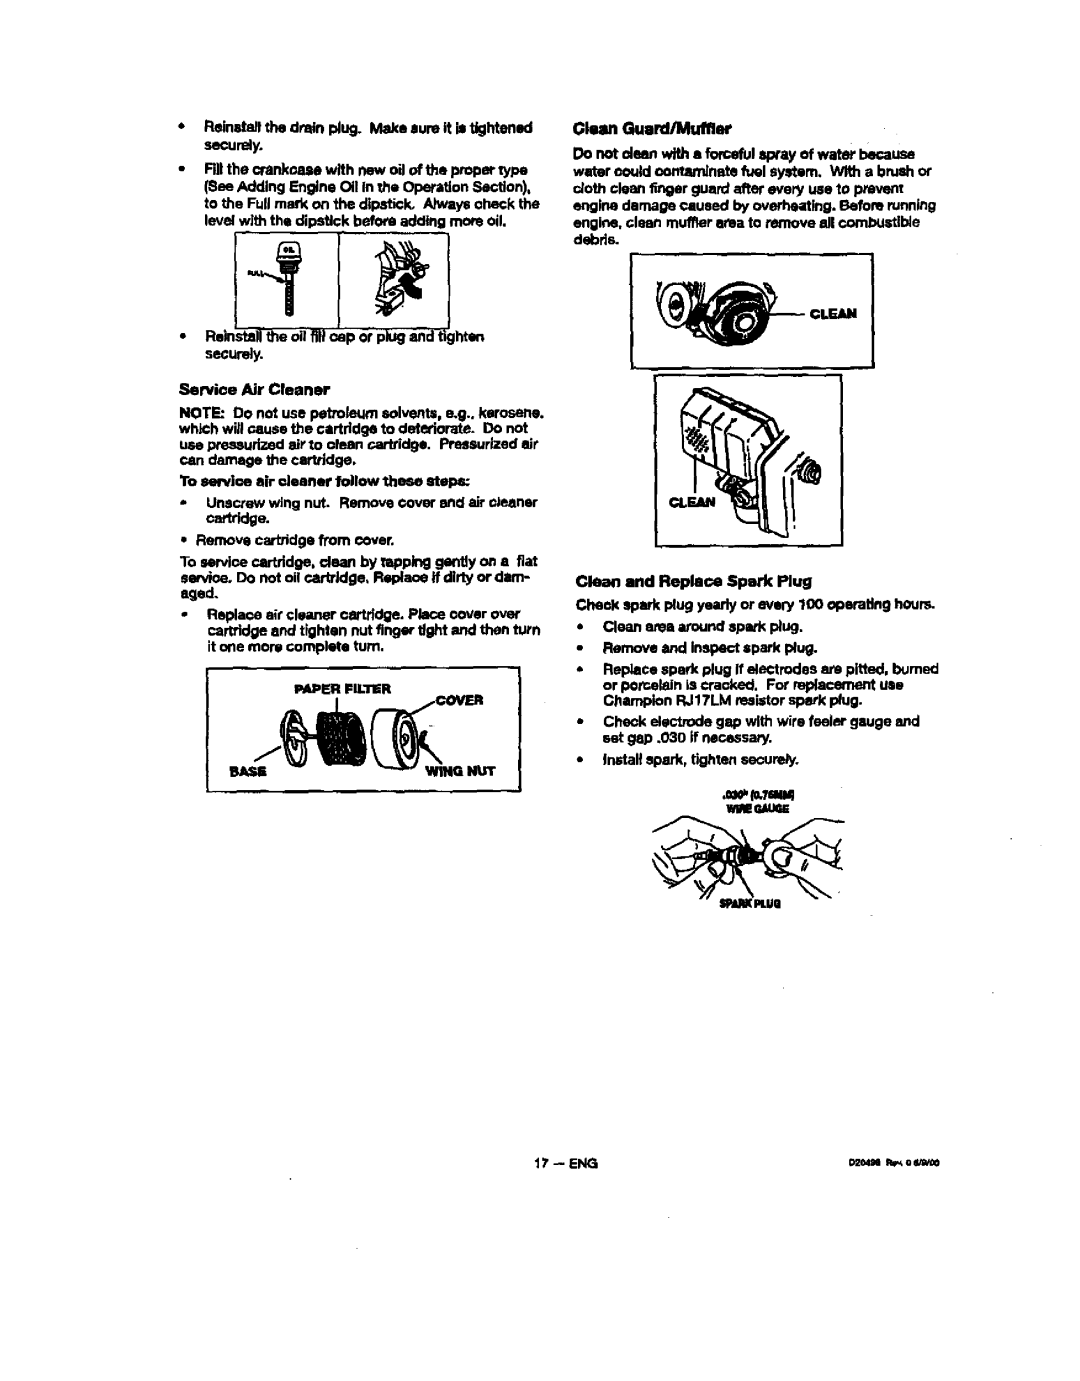 Sears 329, 919, 150 owner manual Service Air Cleaner 